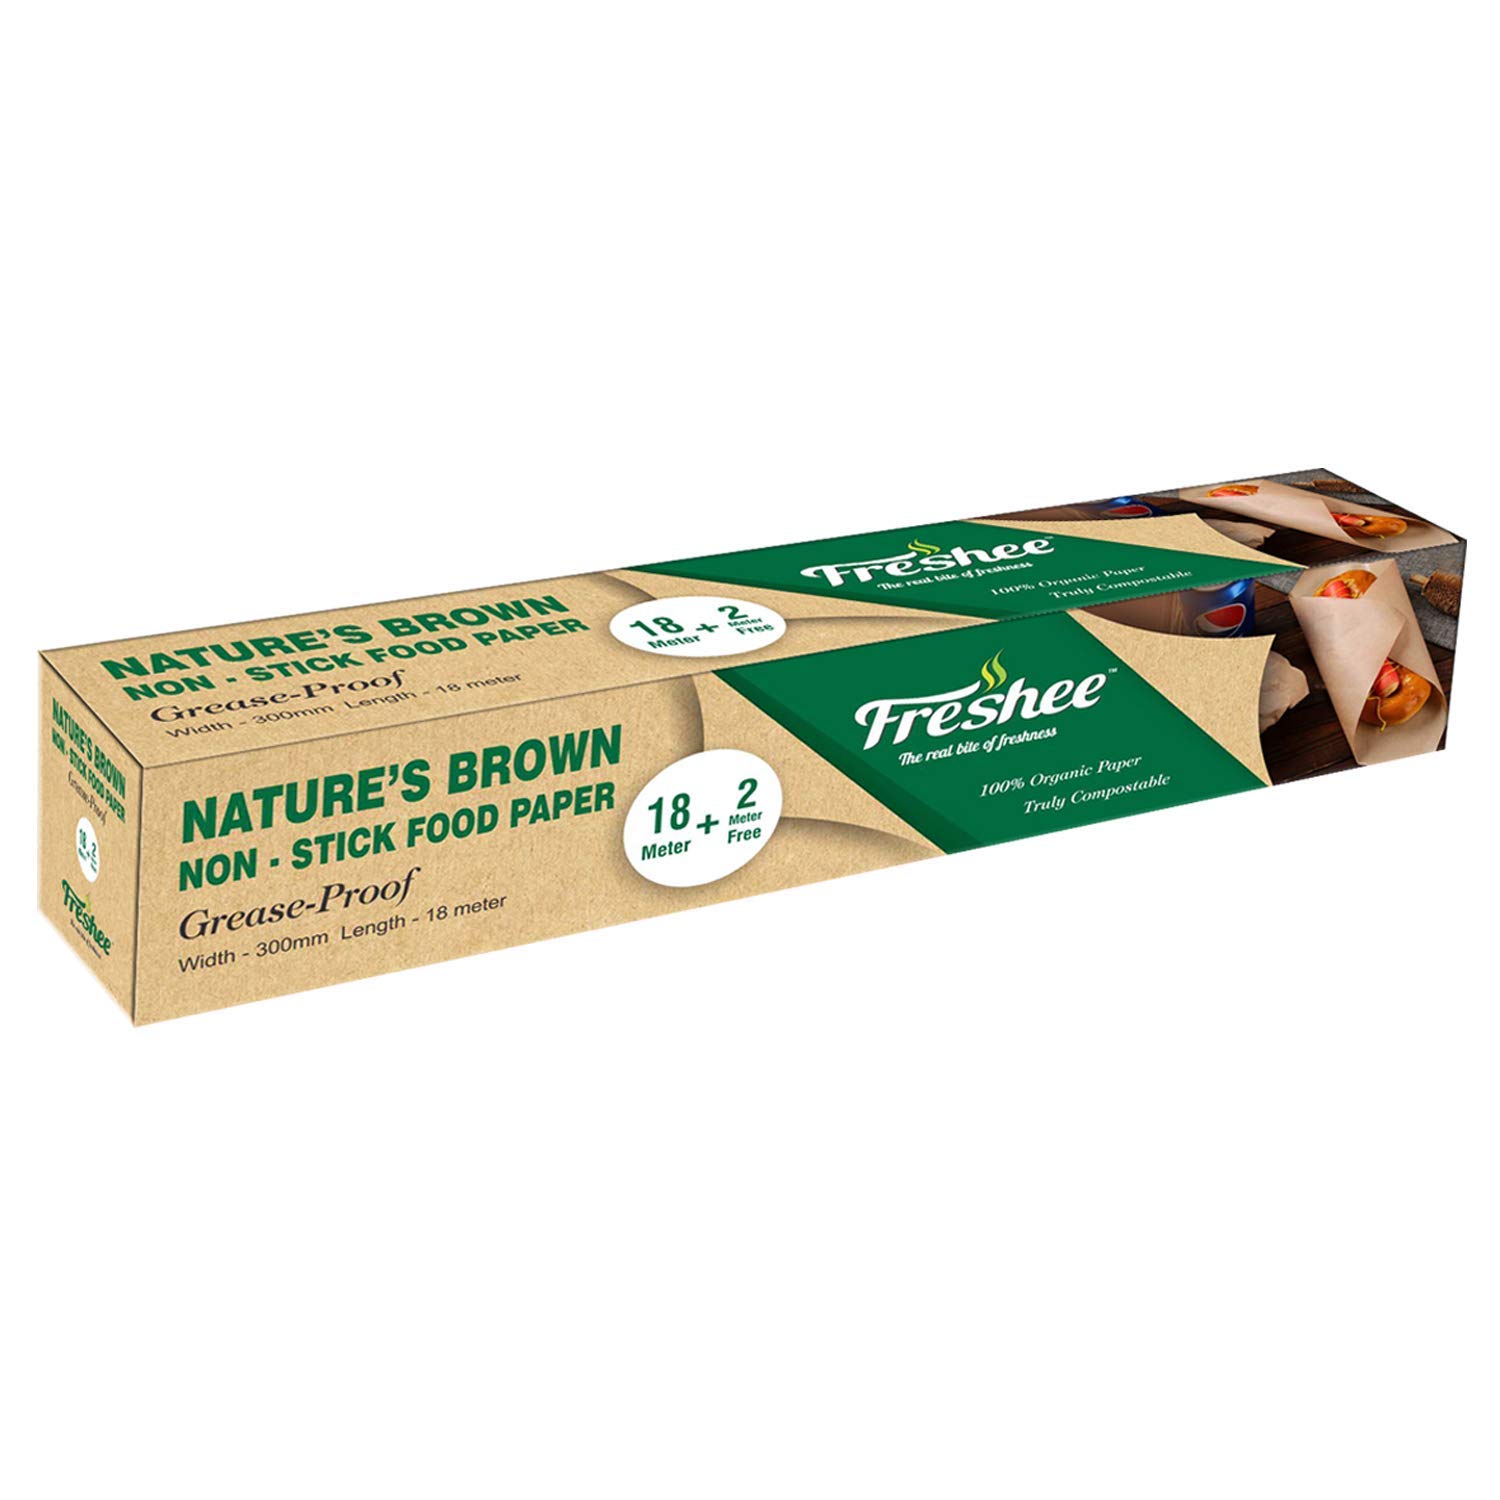 Freshee Nature Brown Non-stick Food Paper